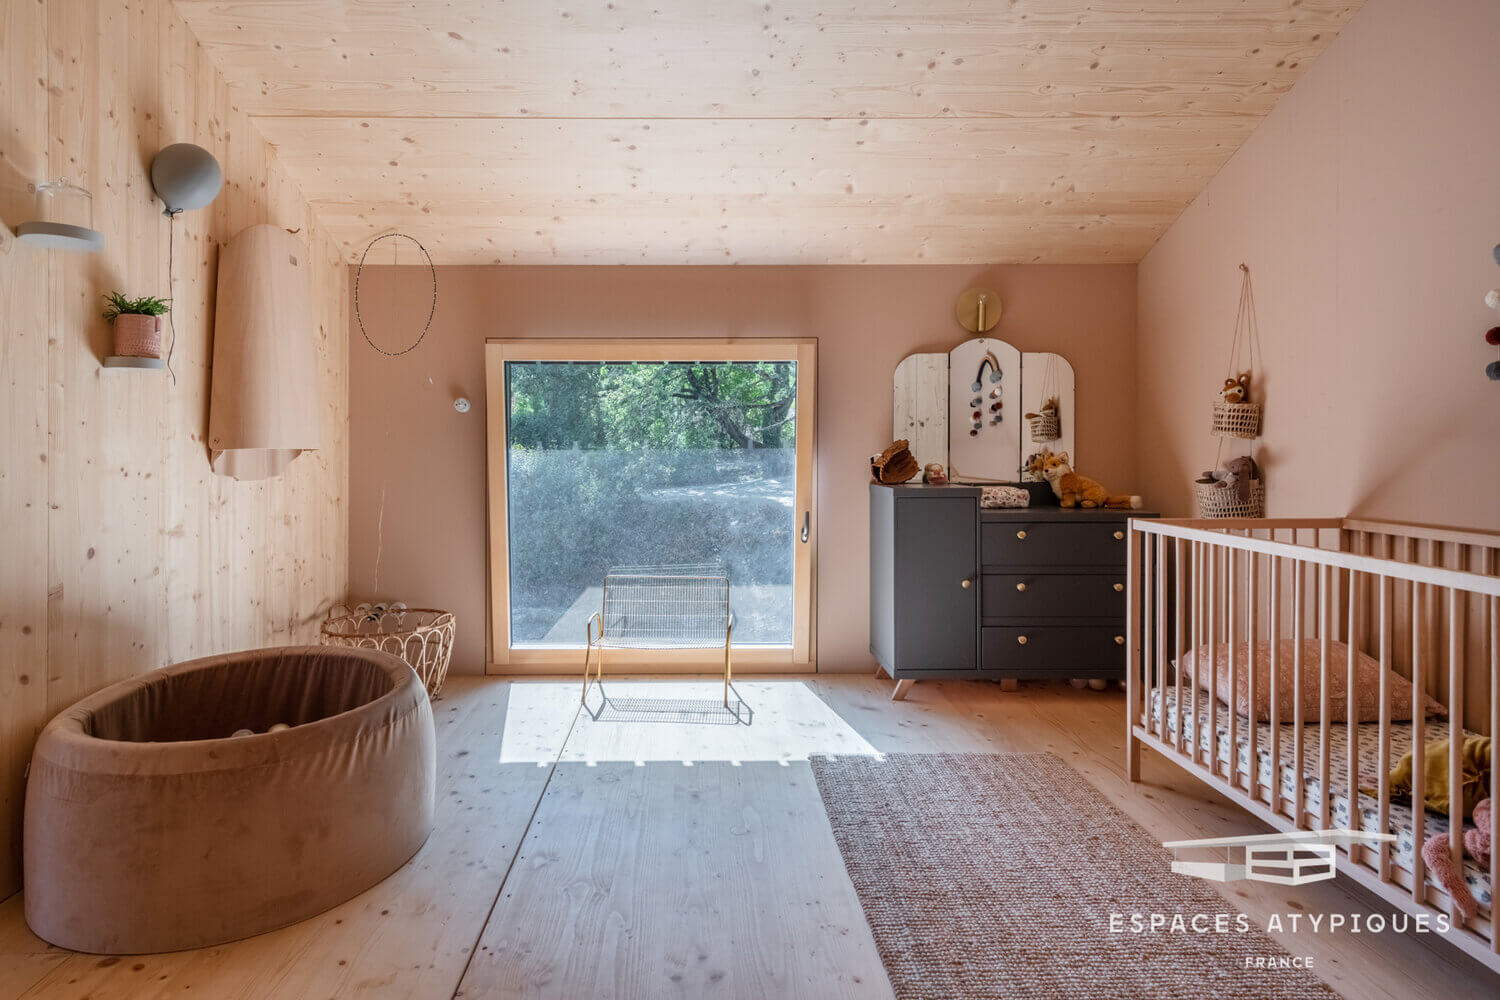 AMinimalisticWoodenHomewithAmazingViewsovertheProvenceCountryside TheNordroom9 A Minimalistic Wooden Home Overlooking the Provence Countryside